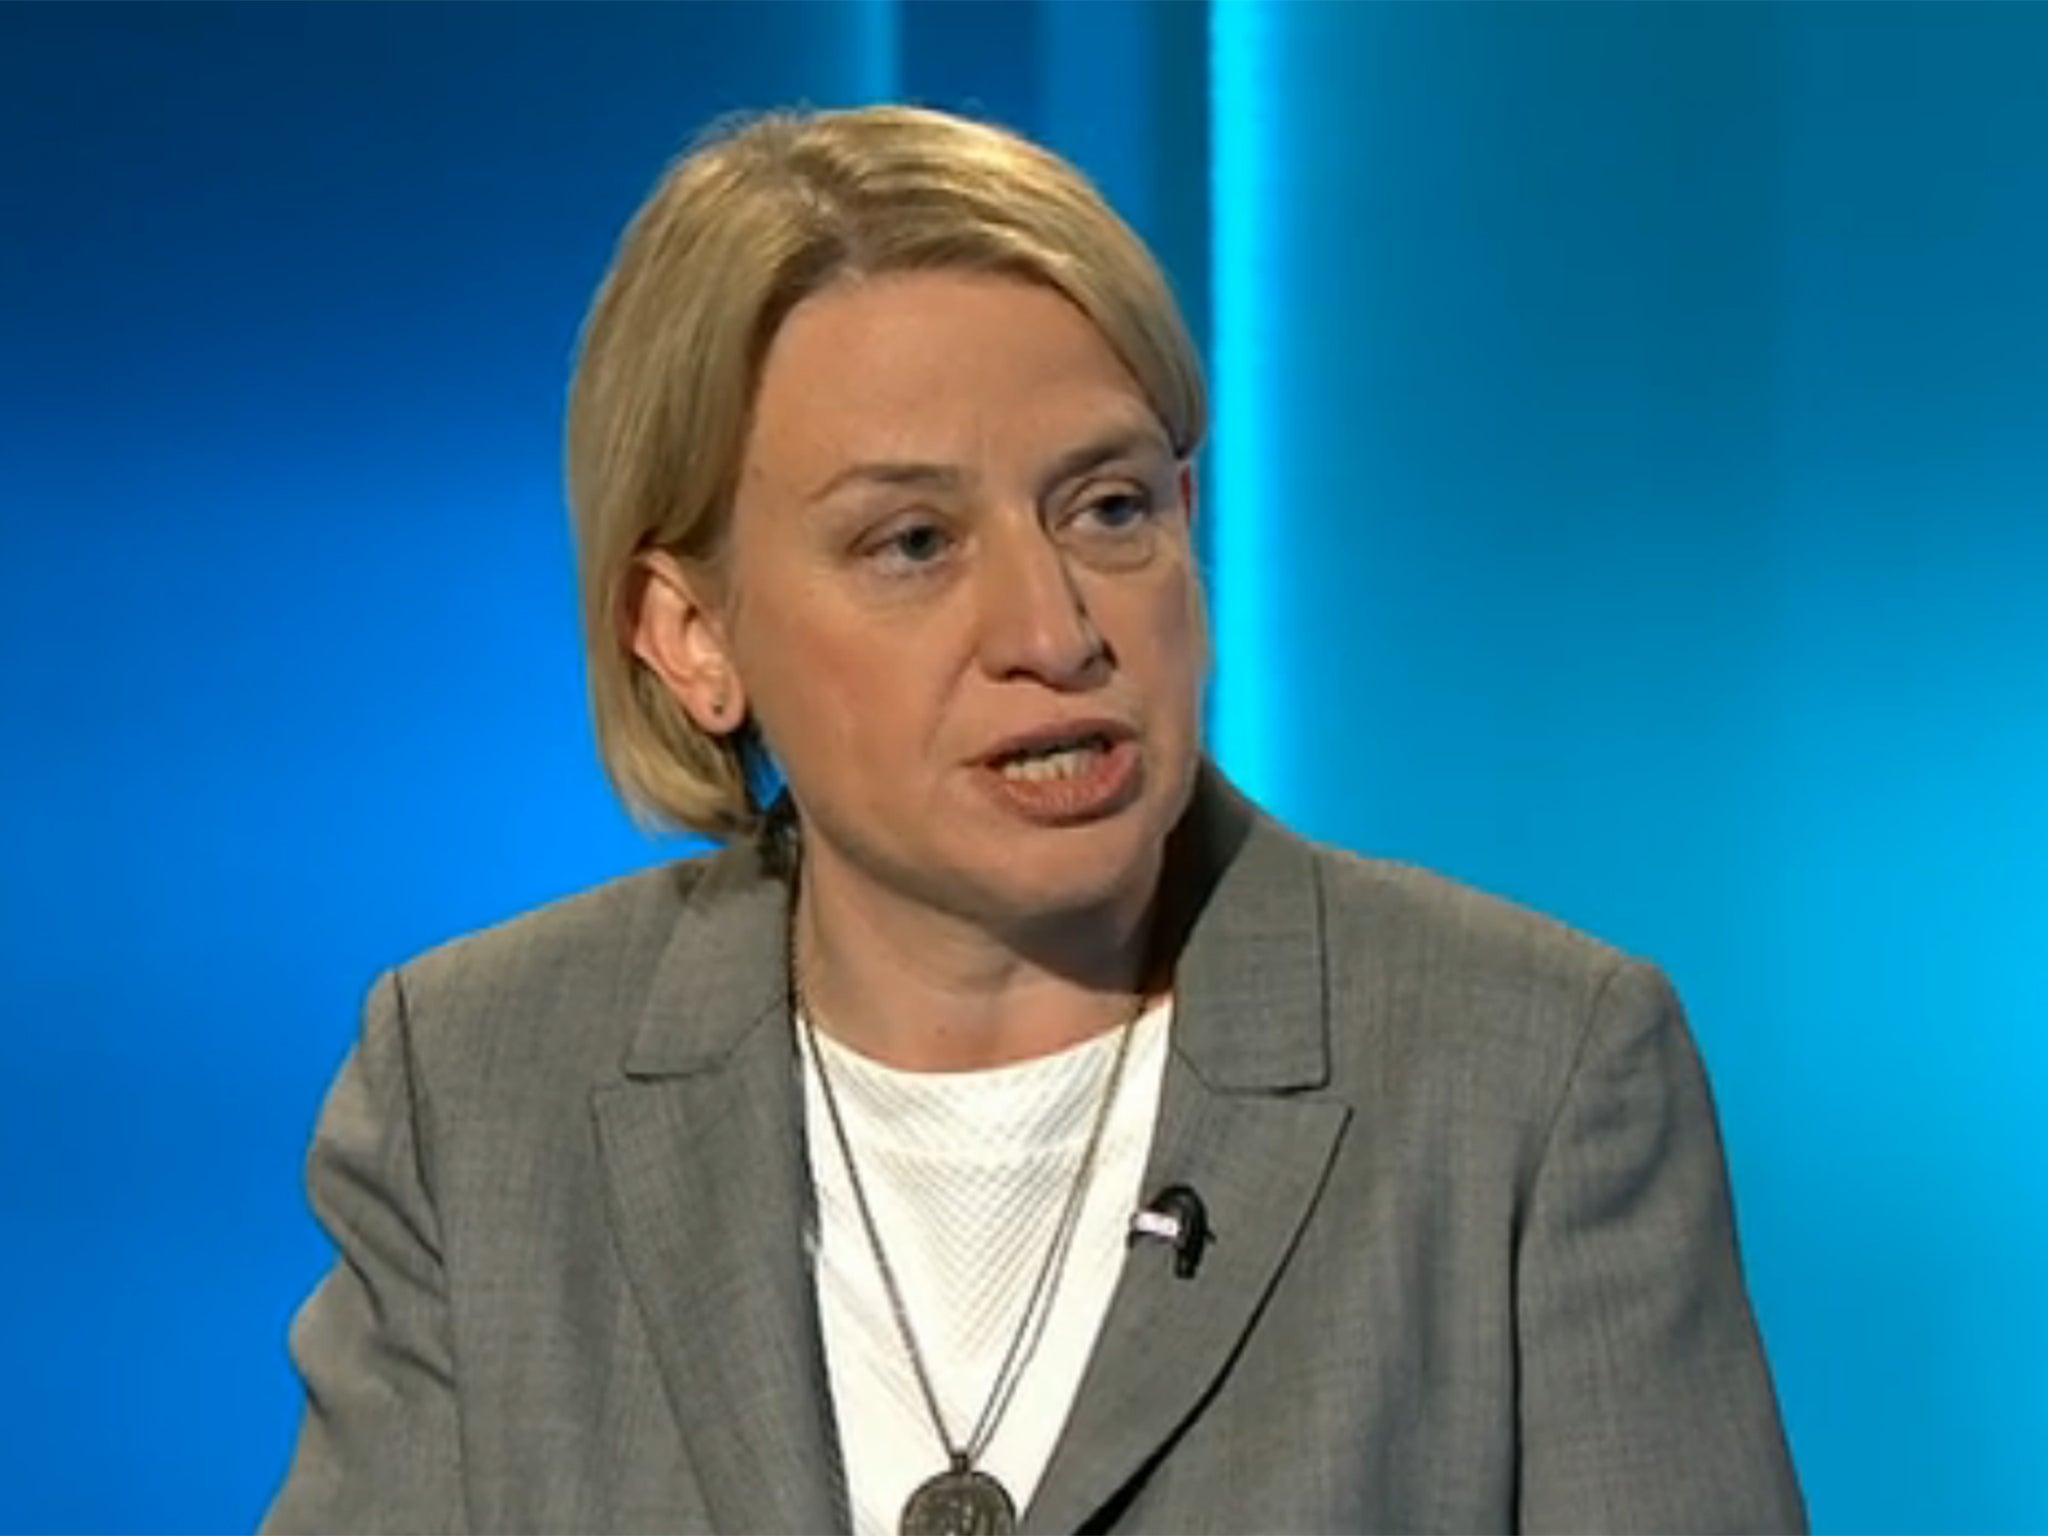 Green Party leader Natalie Bennett gave Mr Rees-Mogg a much lower 5/10